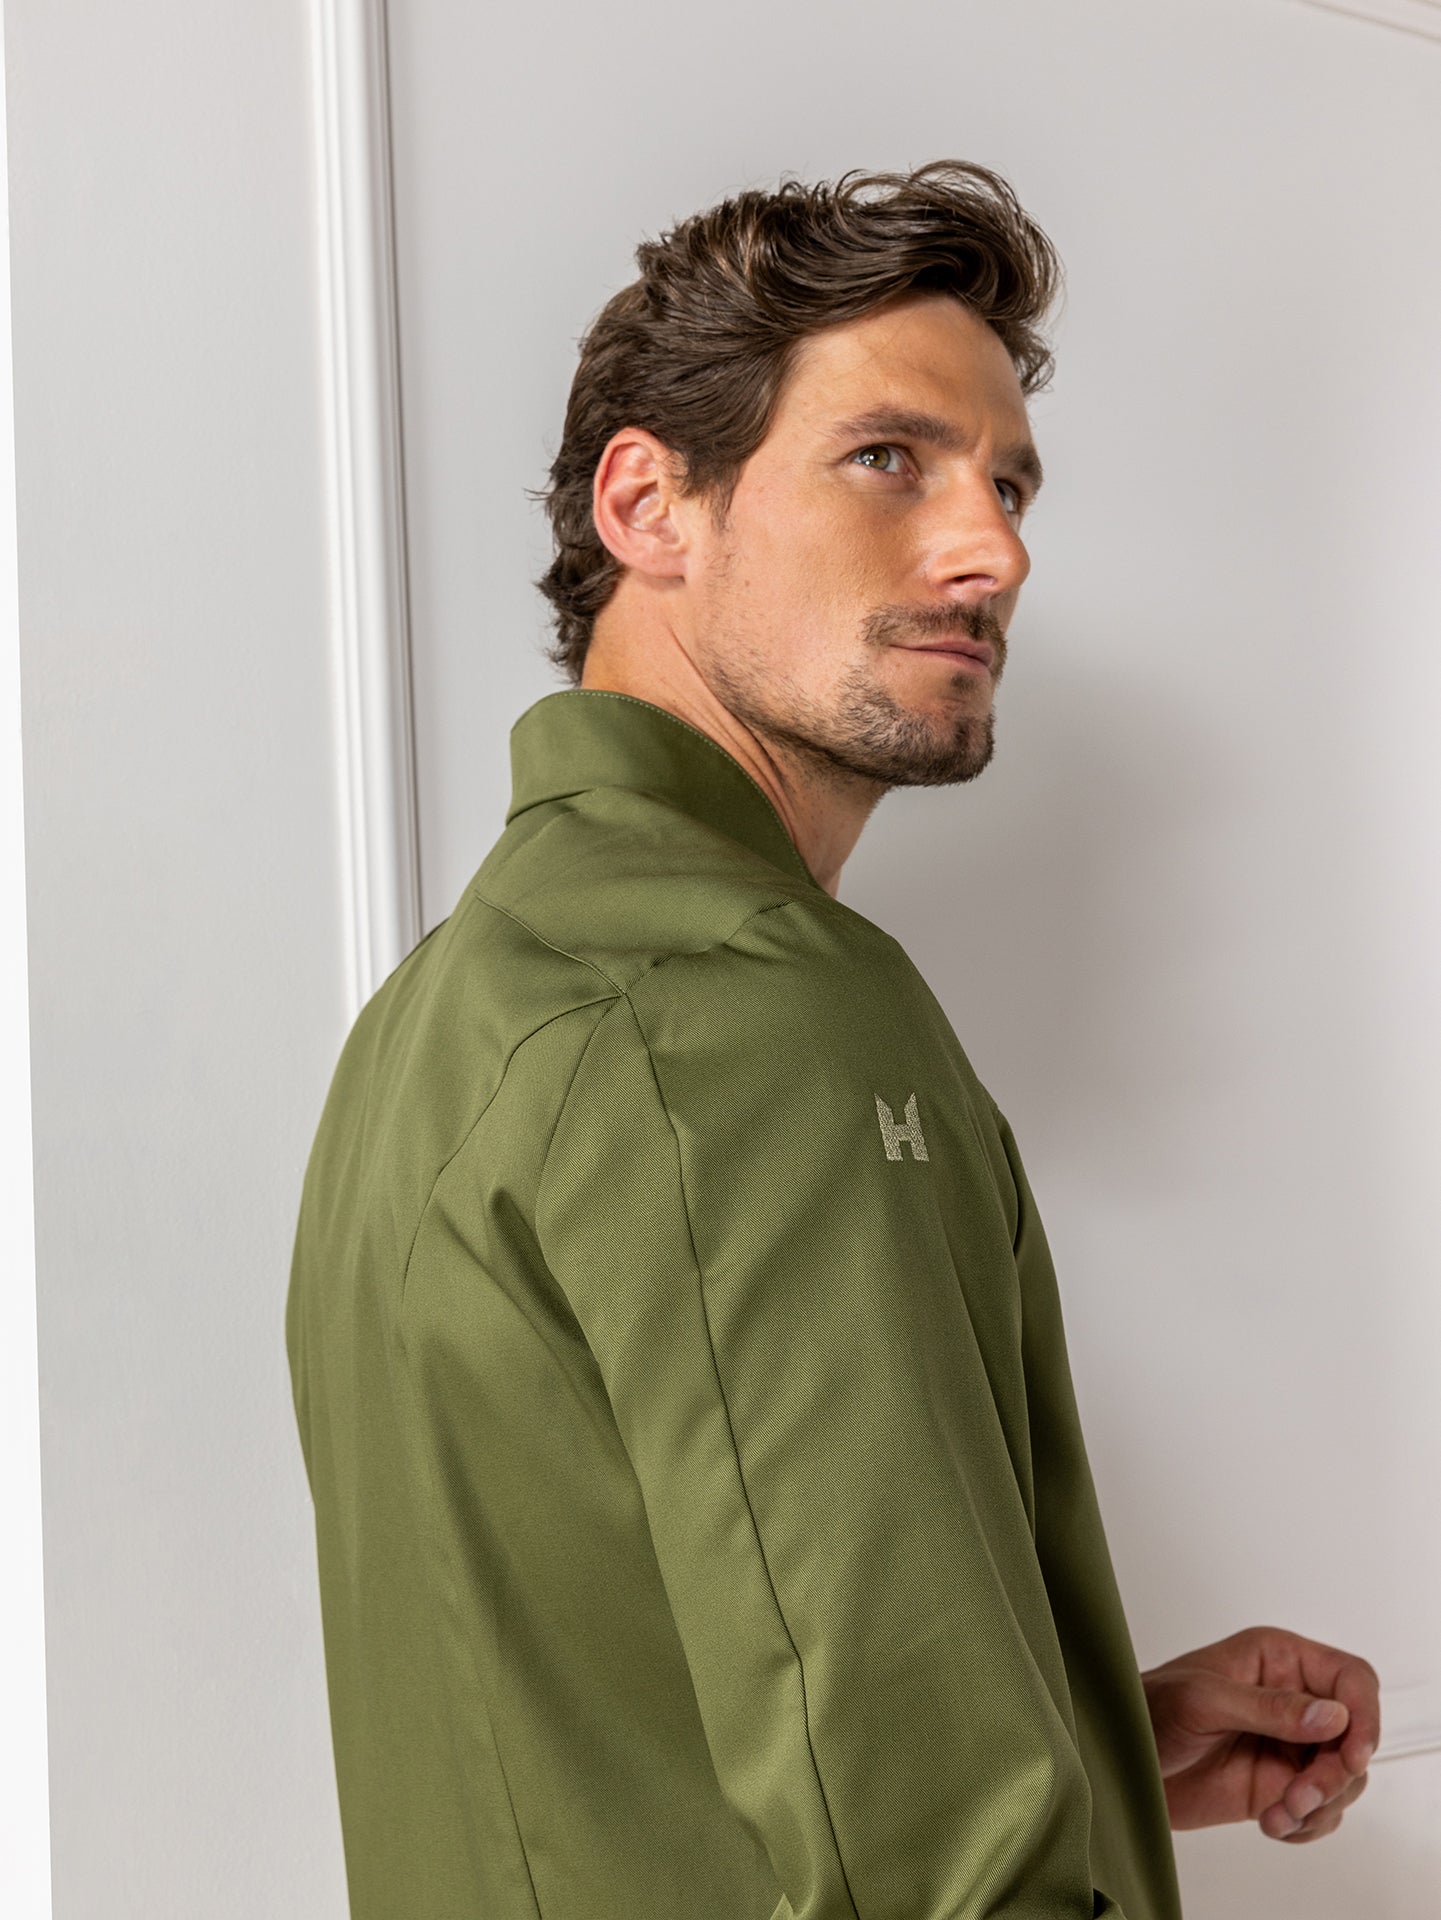 Chef Jacket Nero Olive Green by Le Nouveau Chef -  ChefsCotton